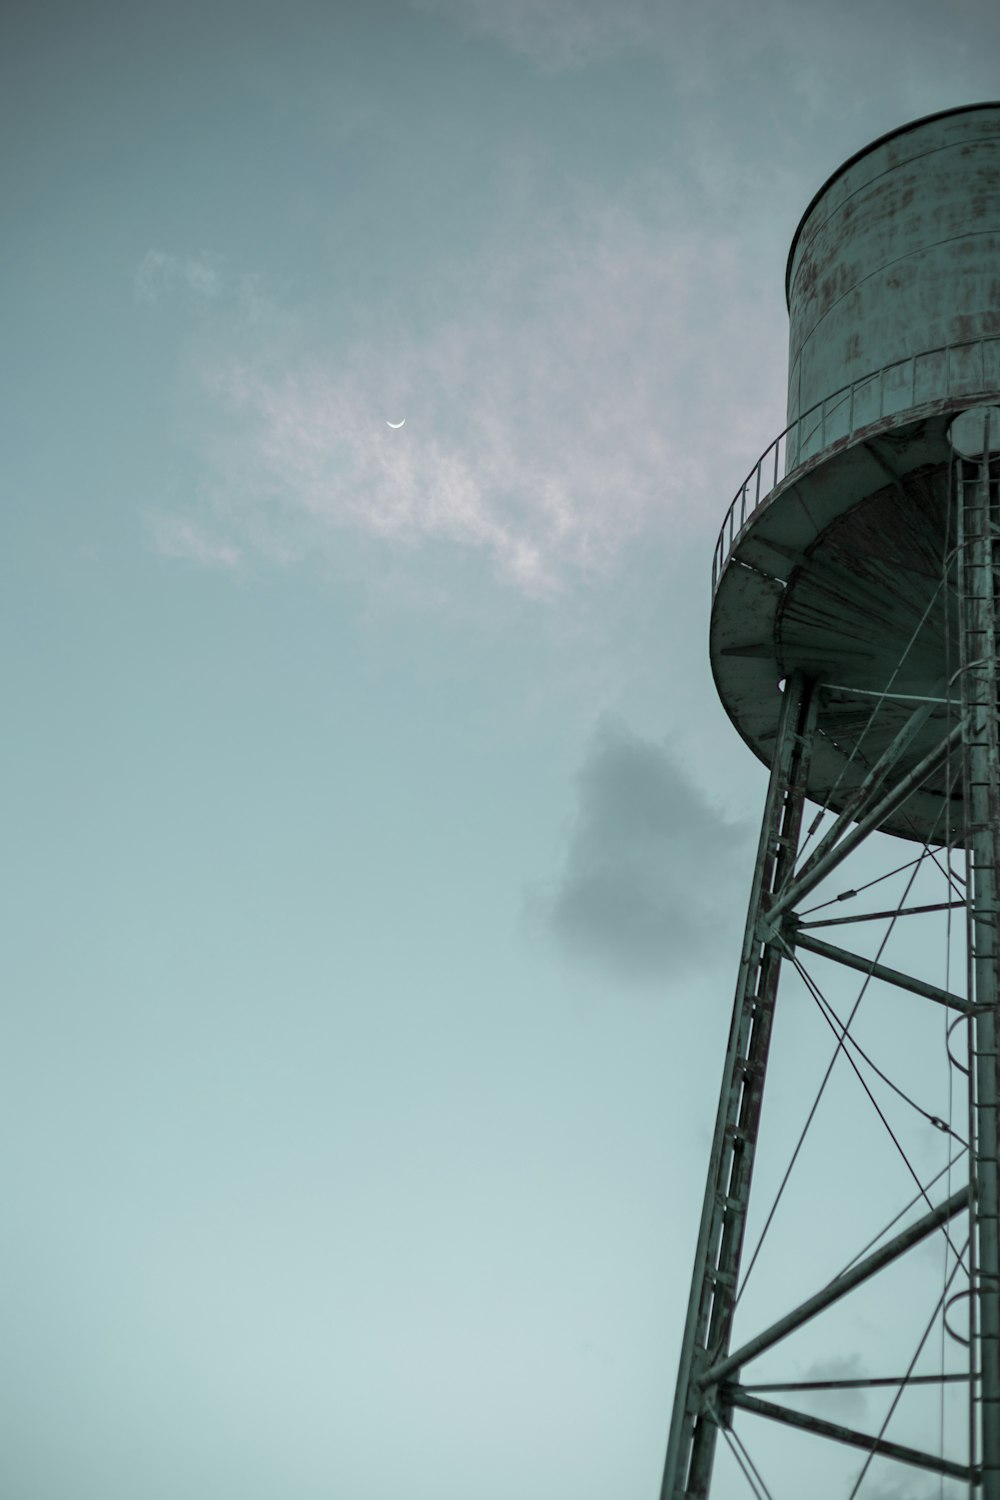 a water tower with a plane flying in the sky